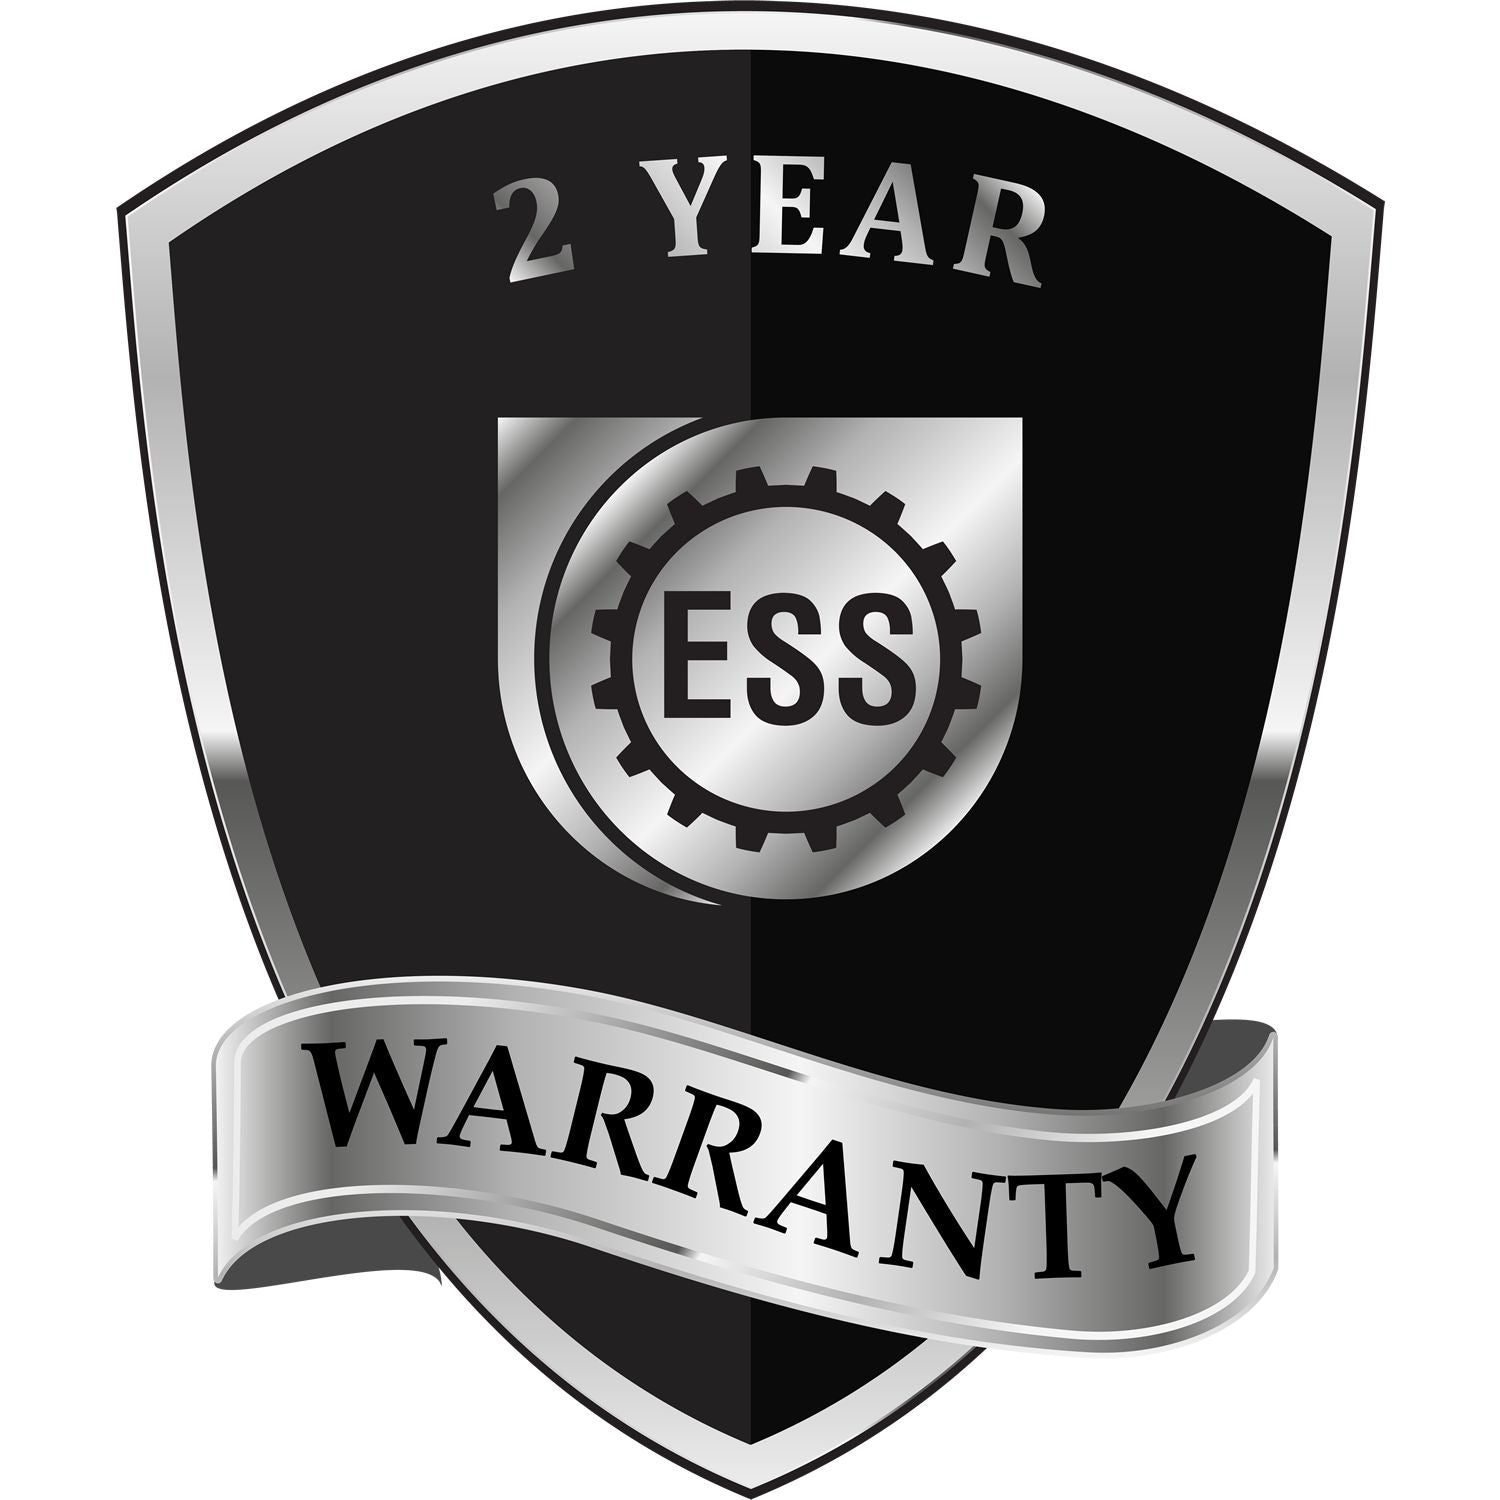 A badge or emblem showing a warranty icon for the Heavy Duty Connecticut Landscape Architect Cast Iron Embosser